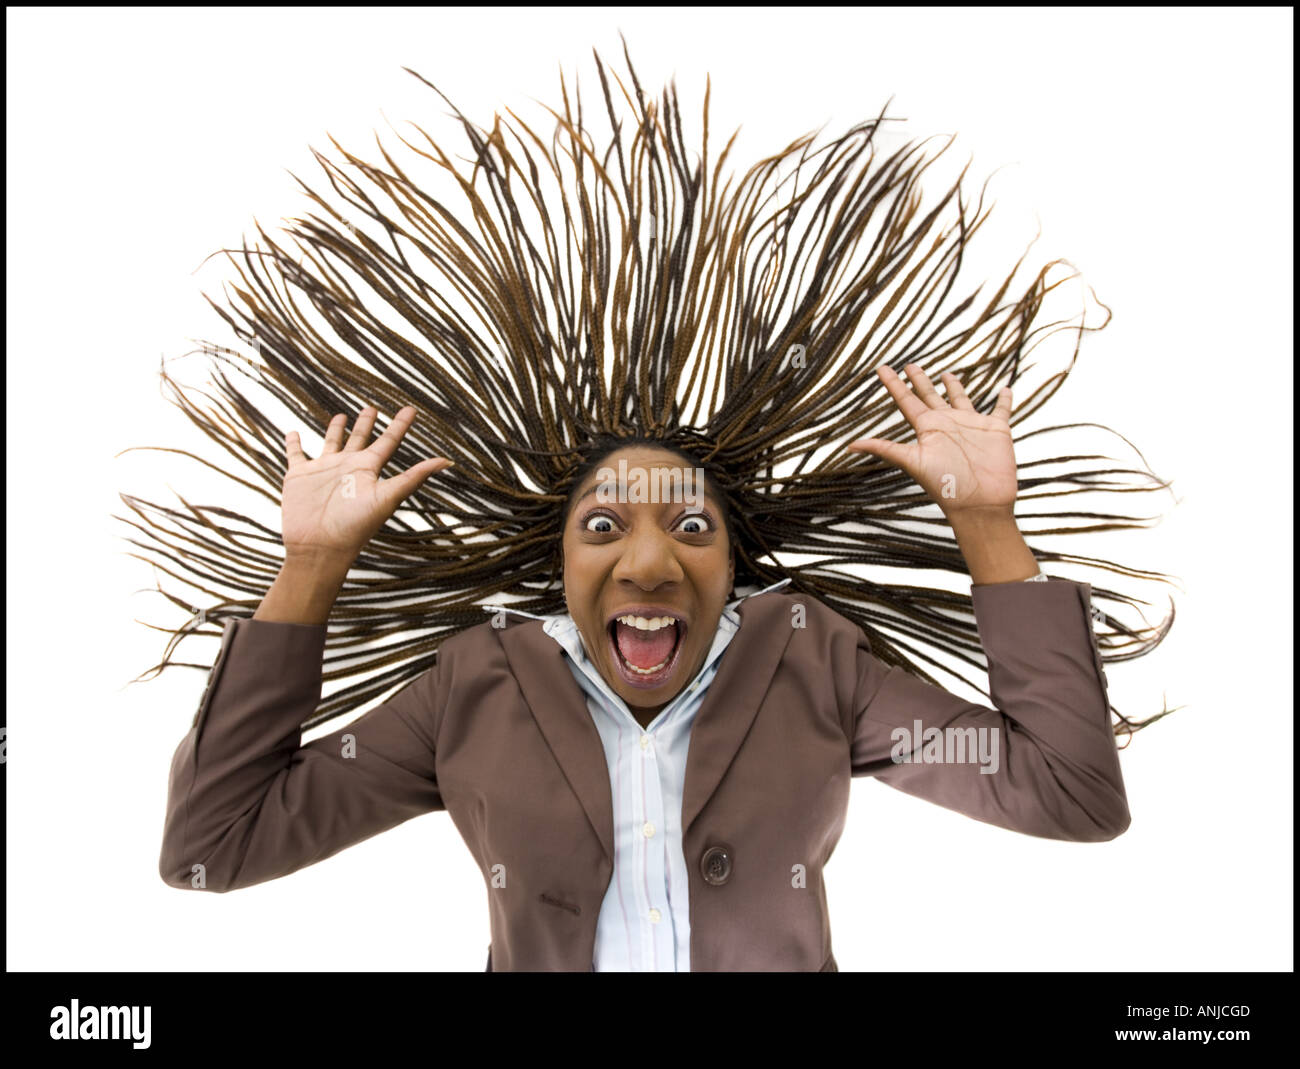 Portrait of a businesswoman shouting with her arms raised Stock Photo